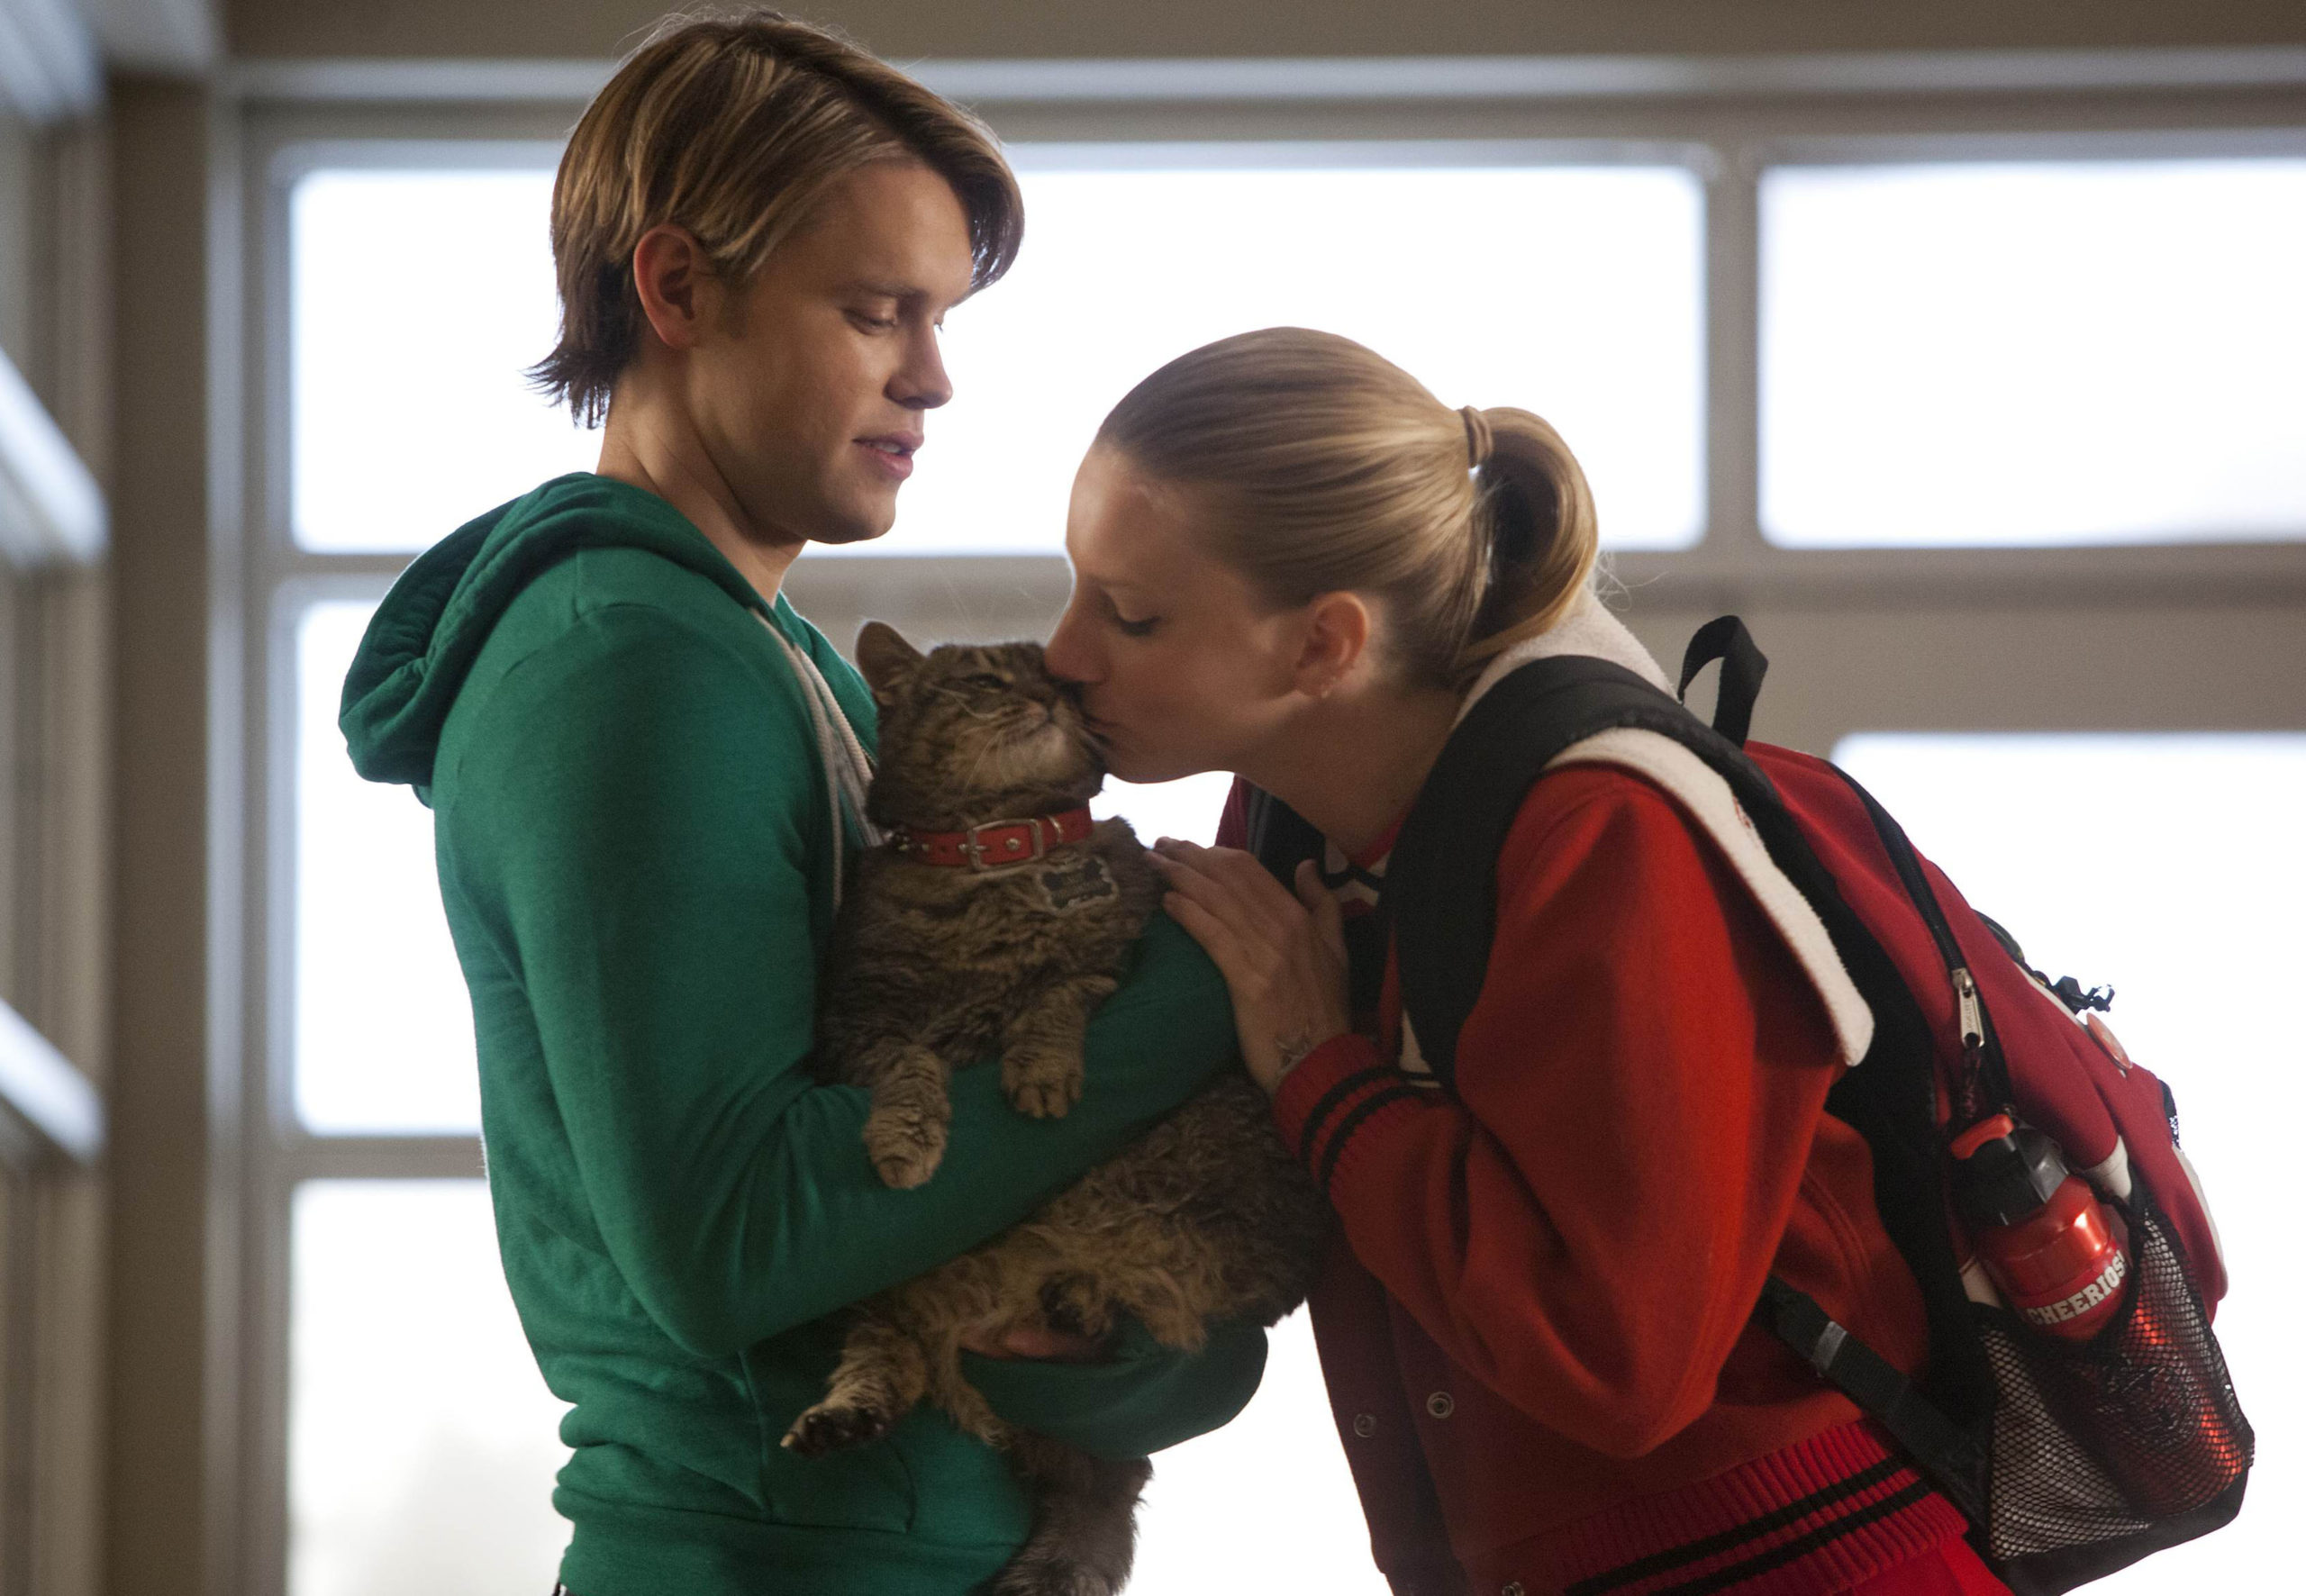 Chord Overstreet as Sam with Heather Morris as Brittany kissing Lord Tubbington on FOX's Glee, Season 4